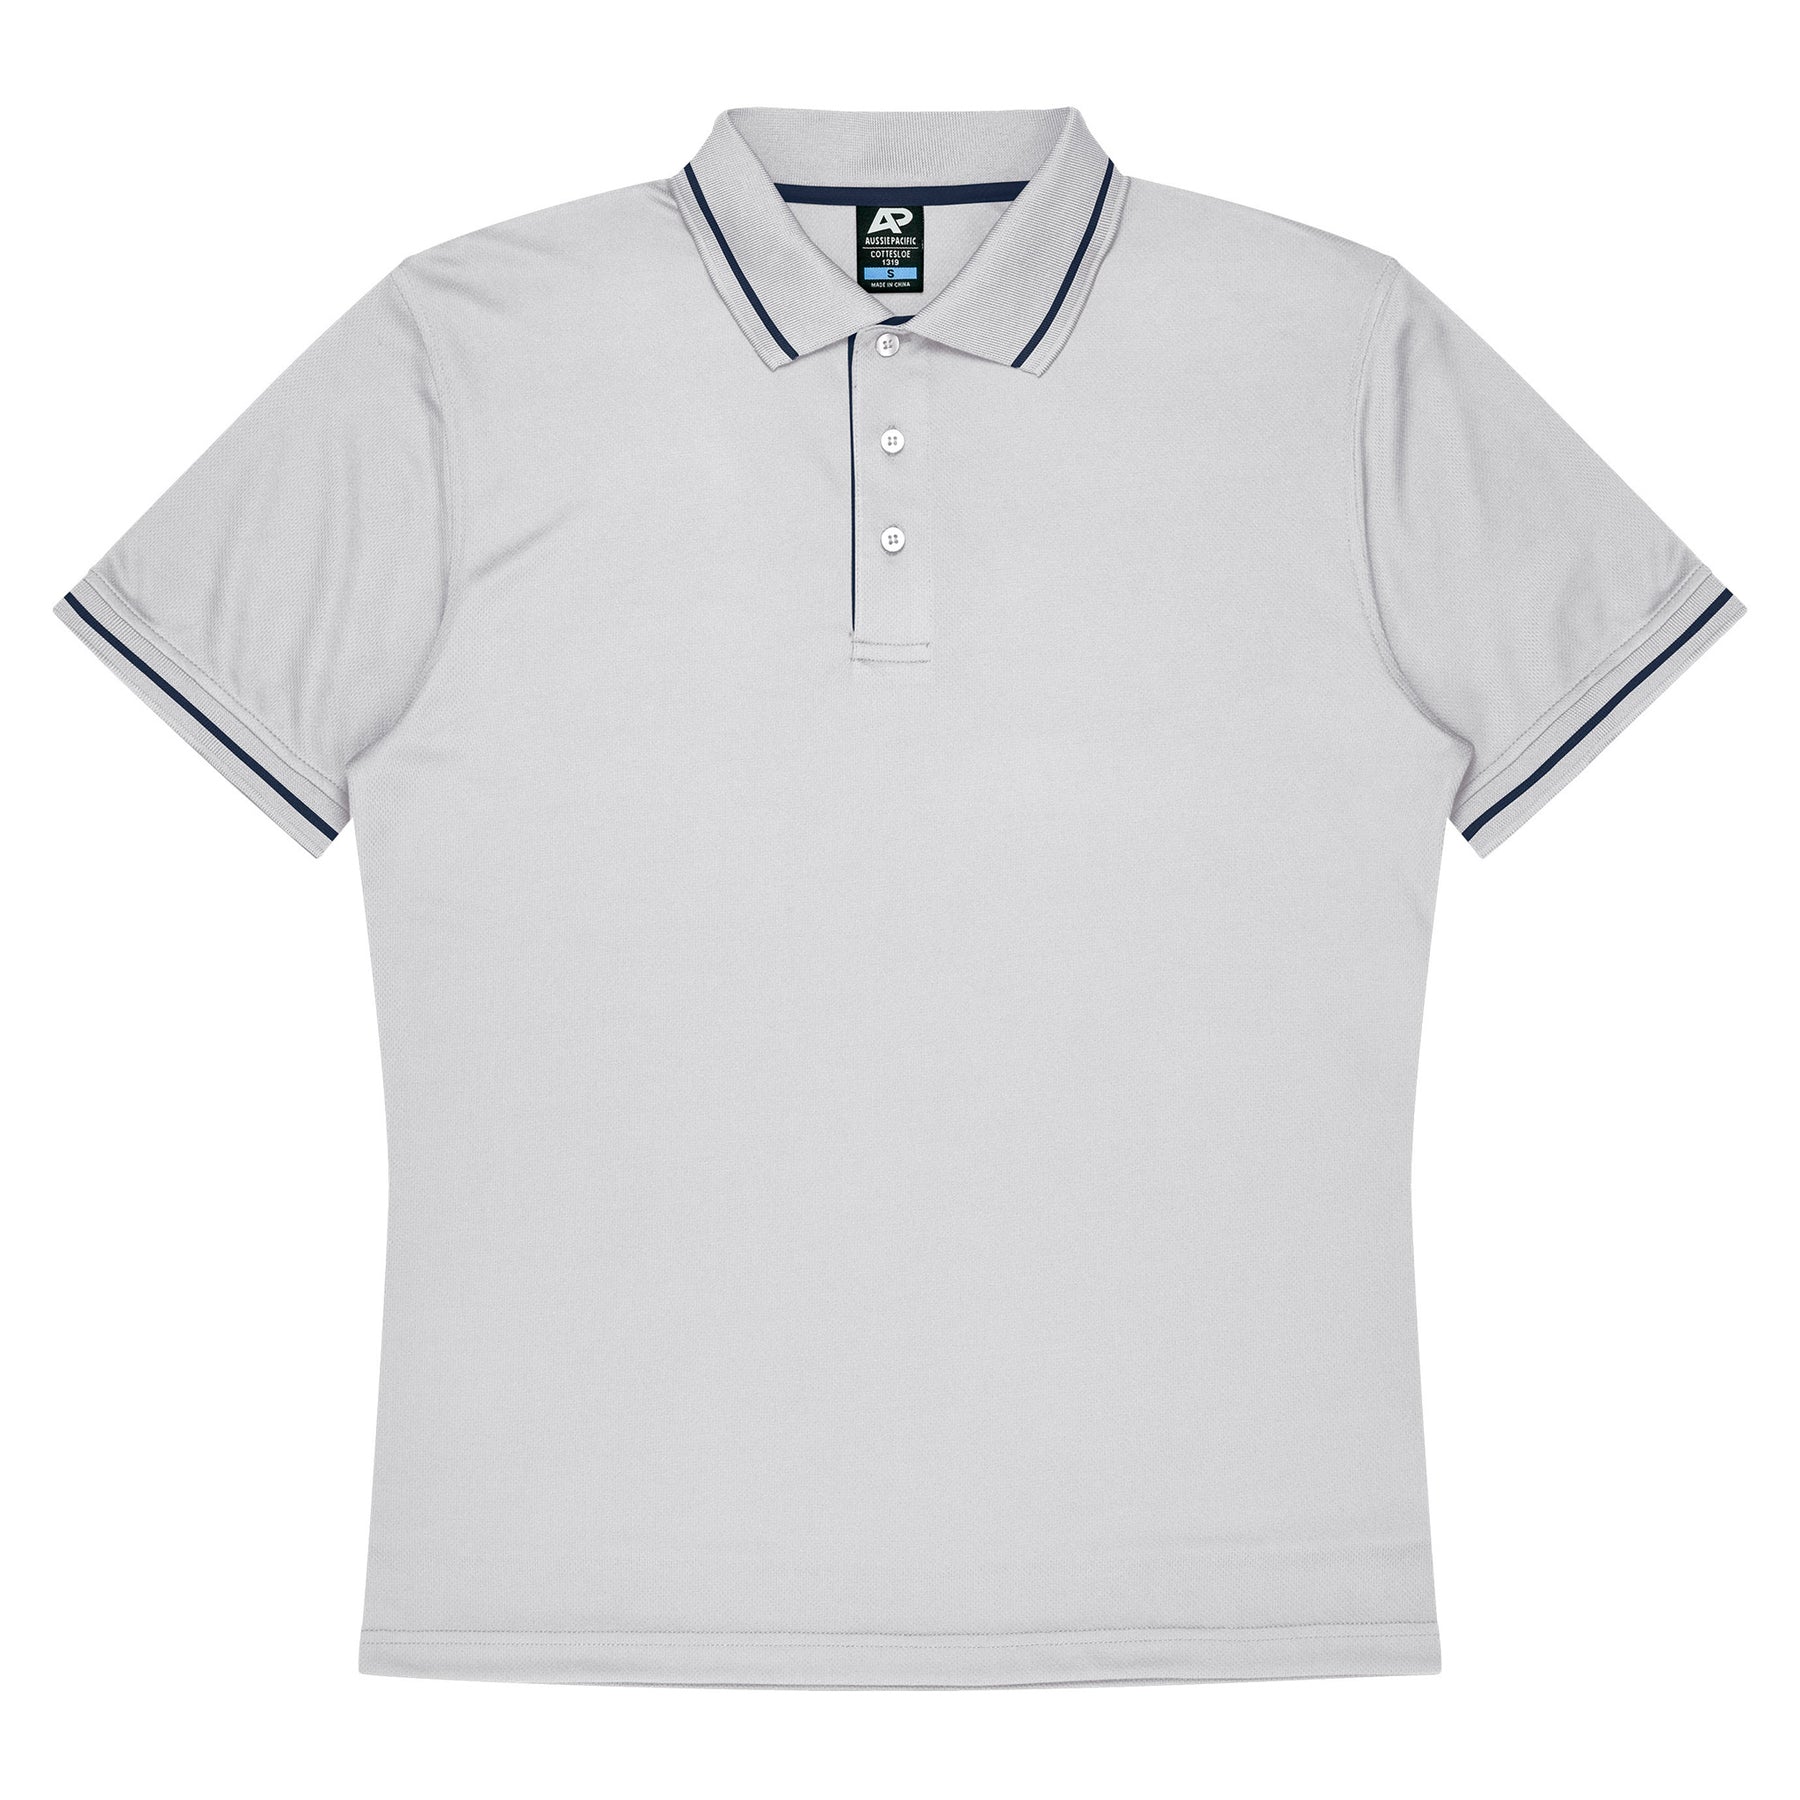 cottesloe kids polo in white navy